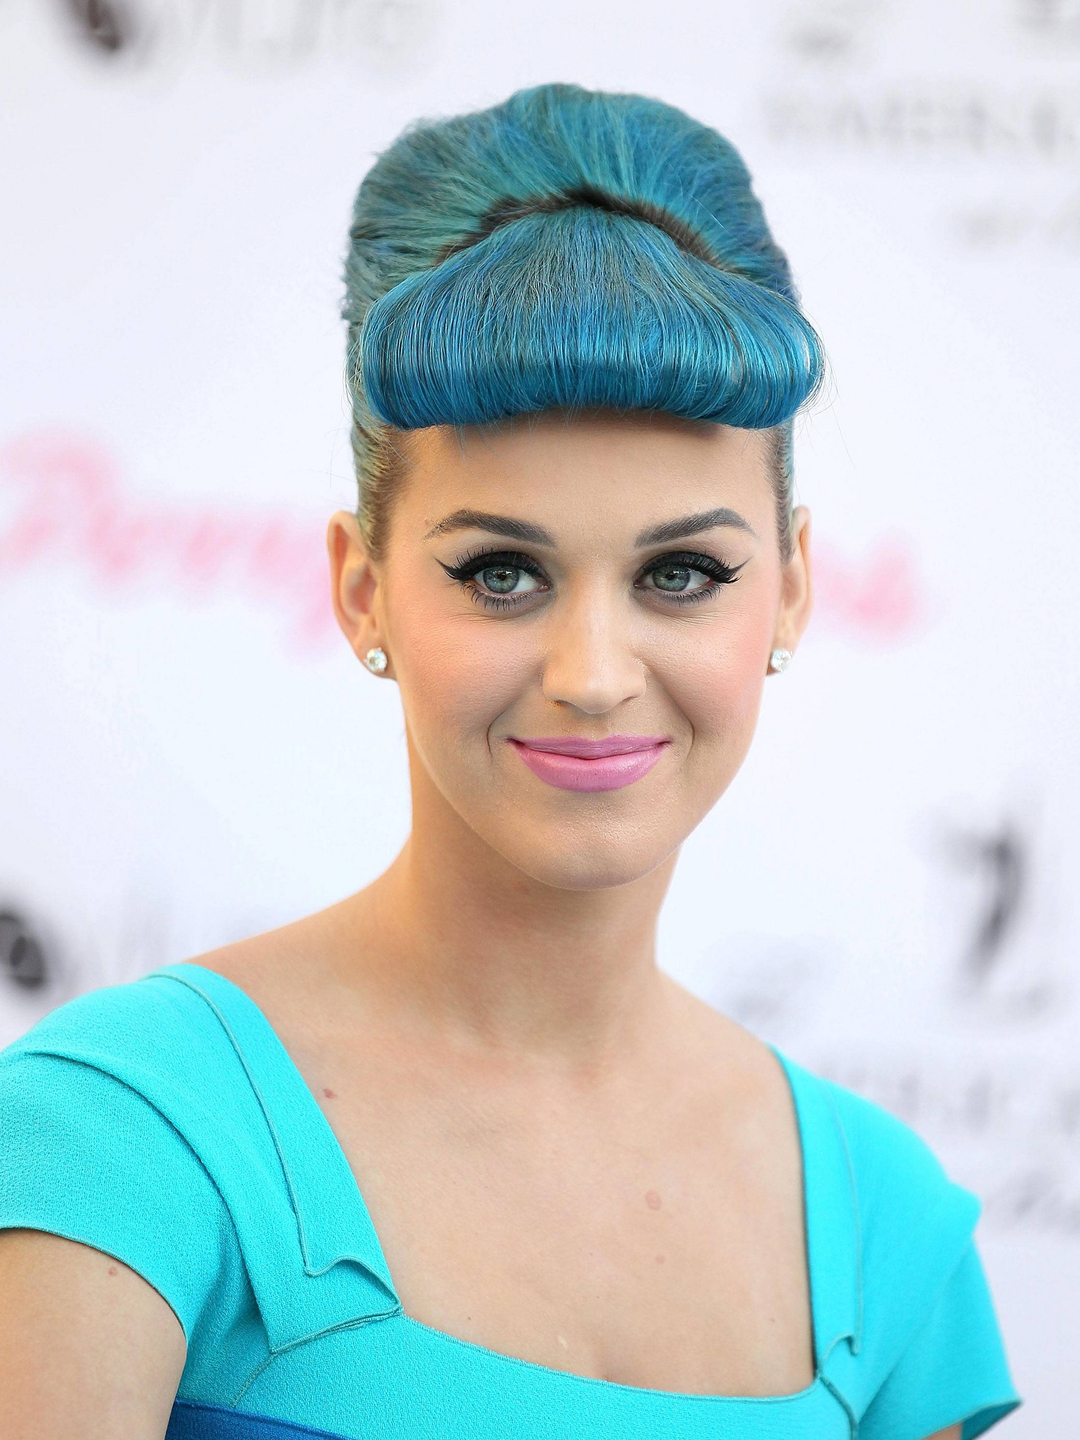 Katy Perry height and weight